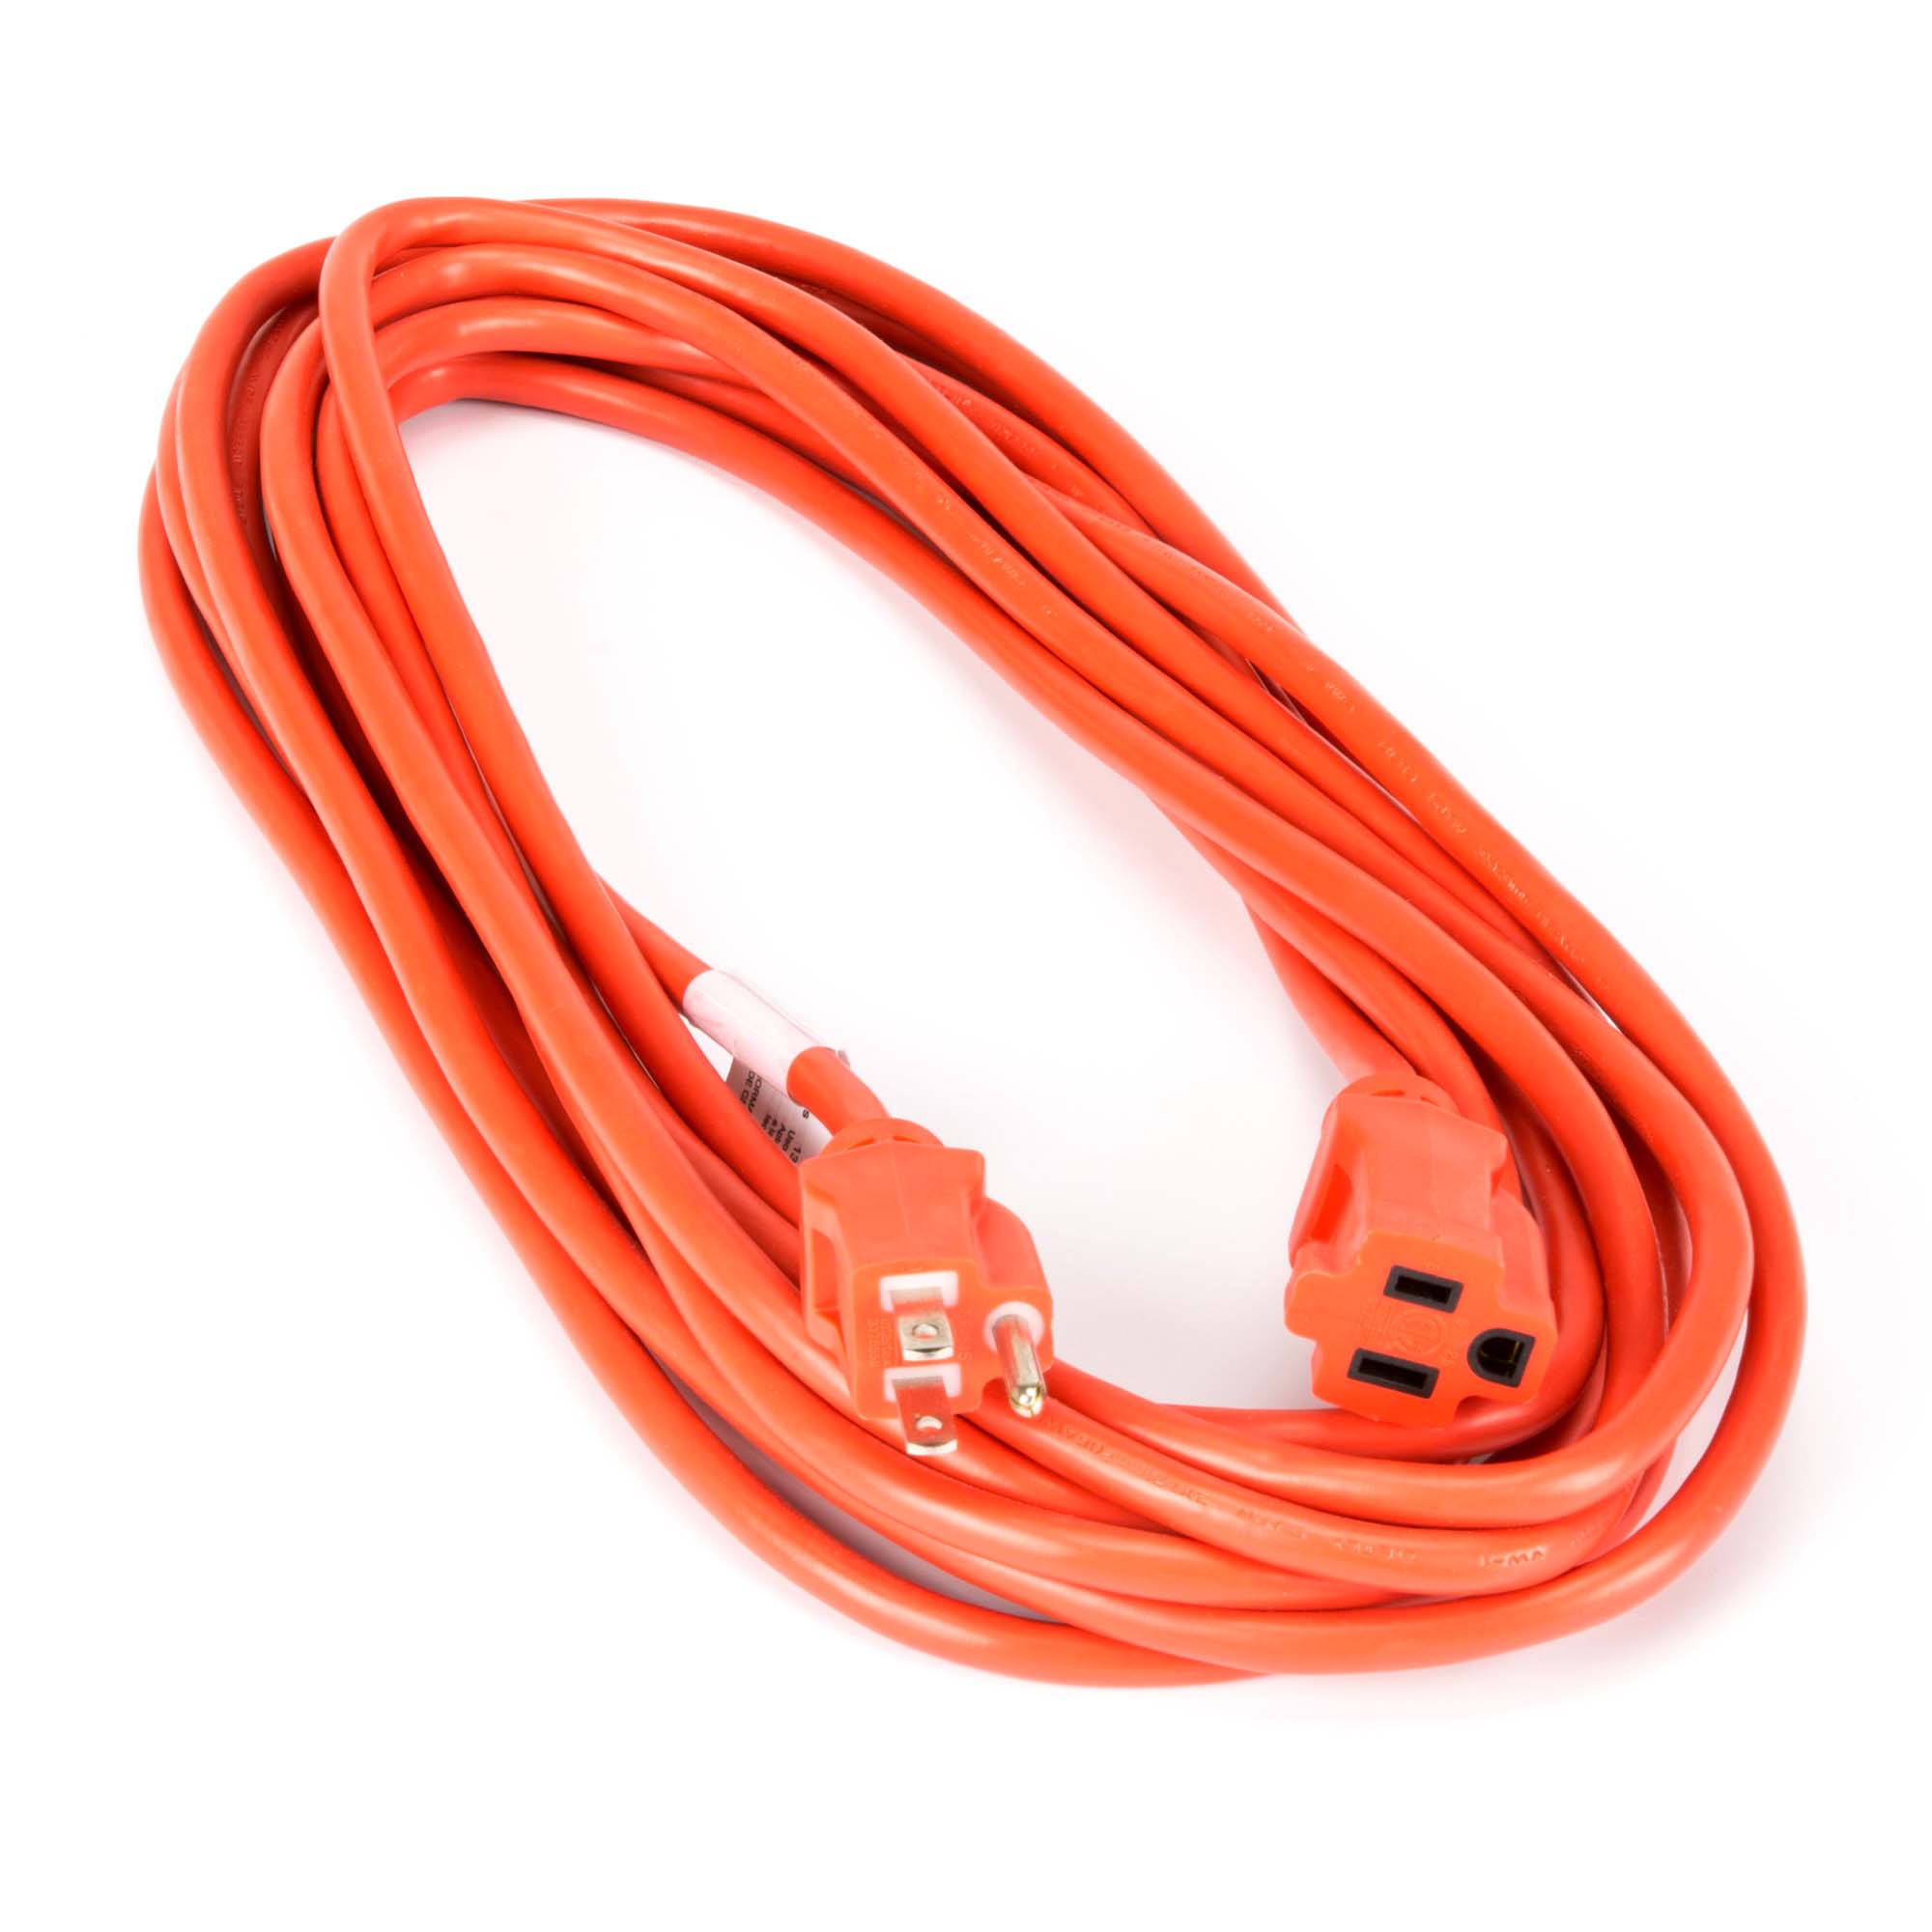 Utilitech 25 Ft 163 3 Prong Sjtw Light Duty General Extension Cord In